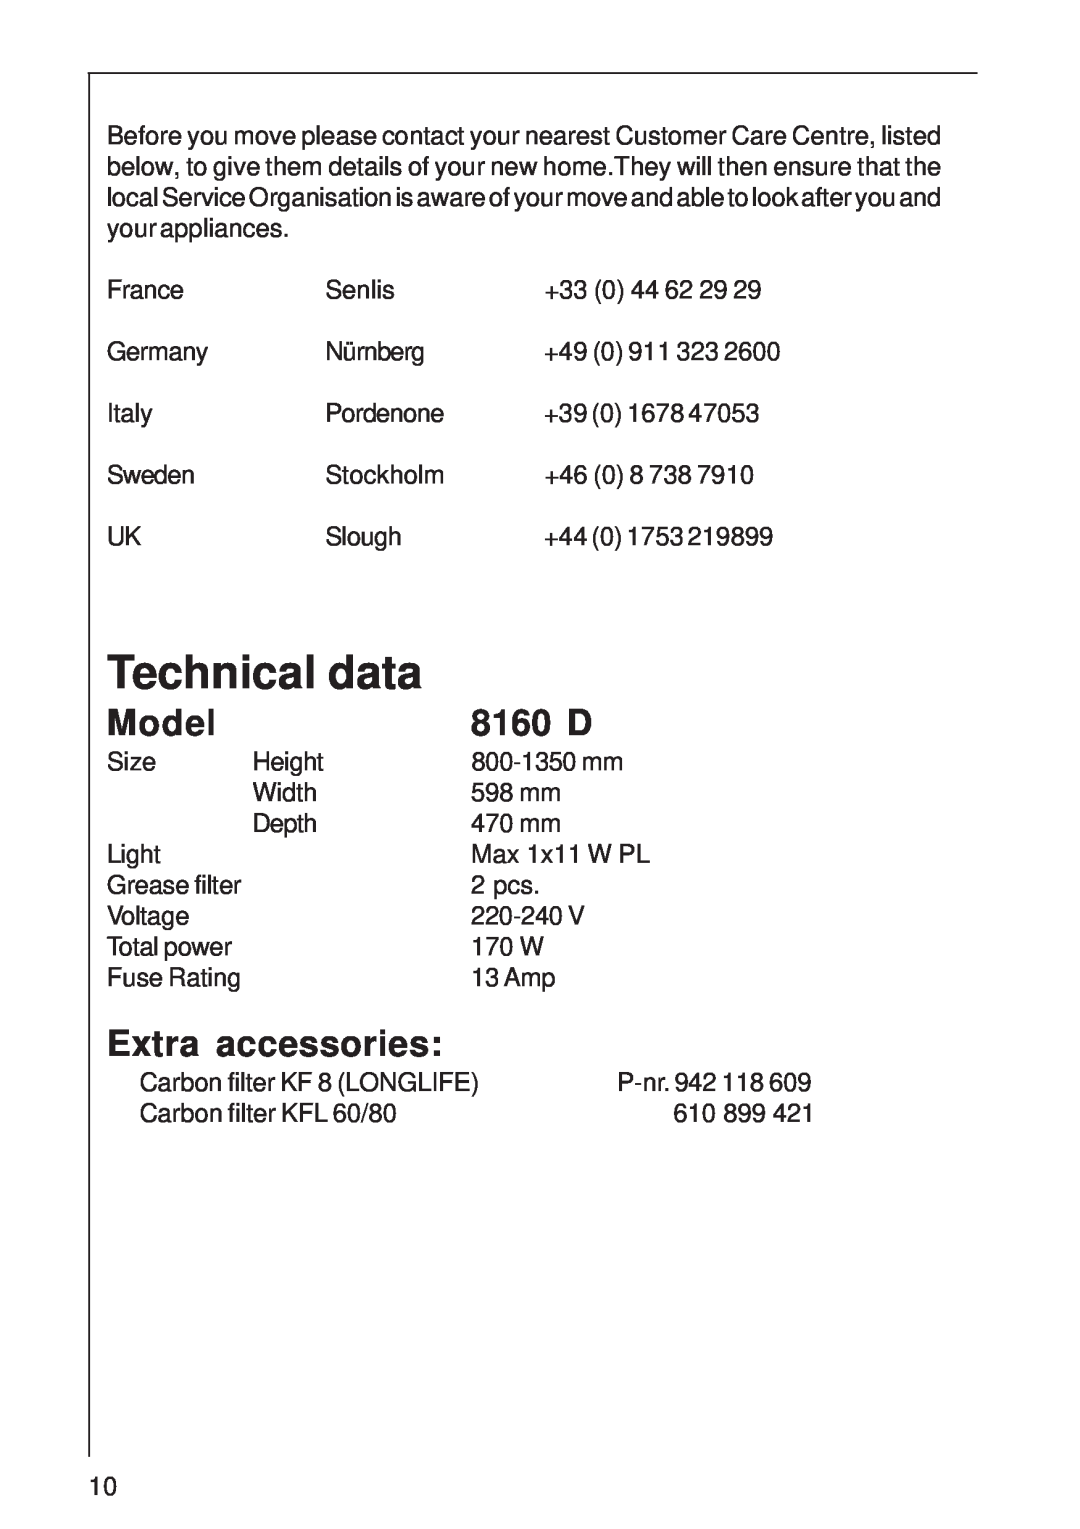 AEG 8160 D installation instructions Technical data, Model, Extra accessories 